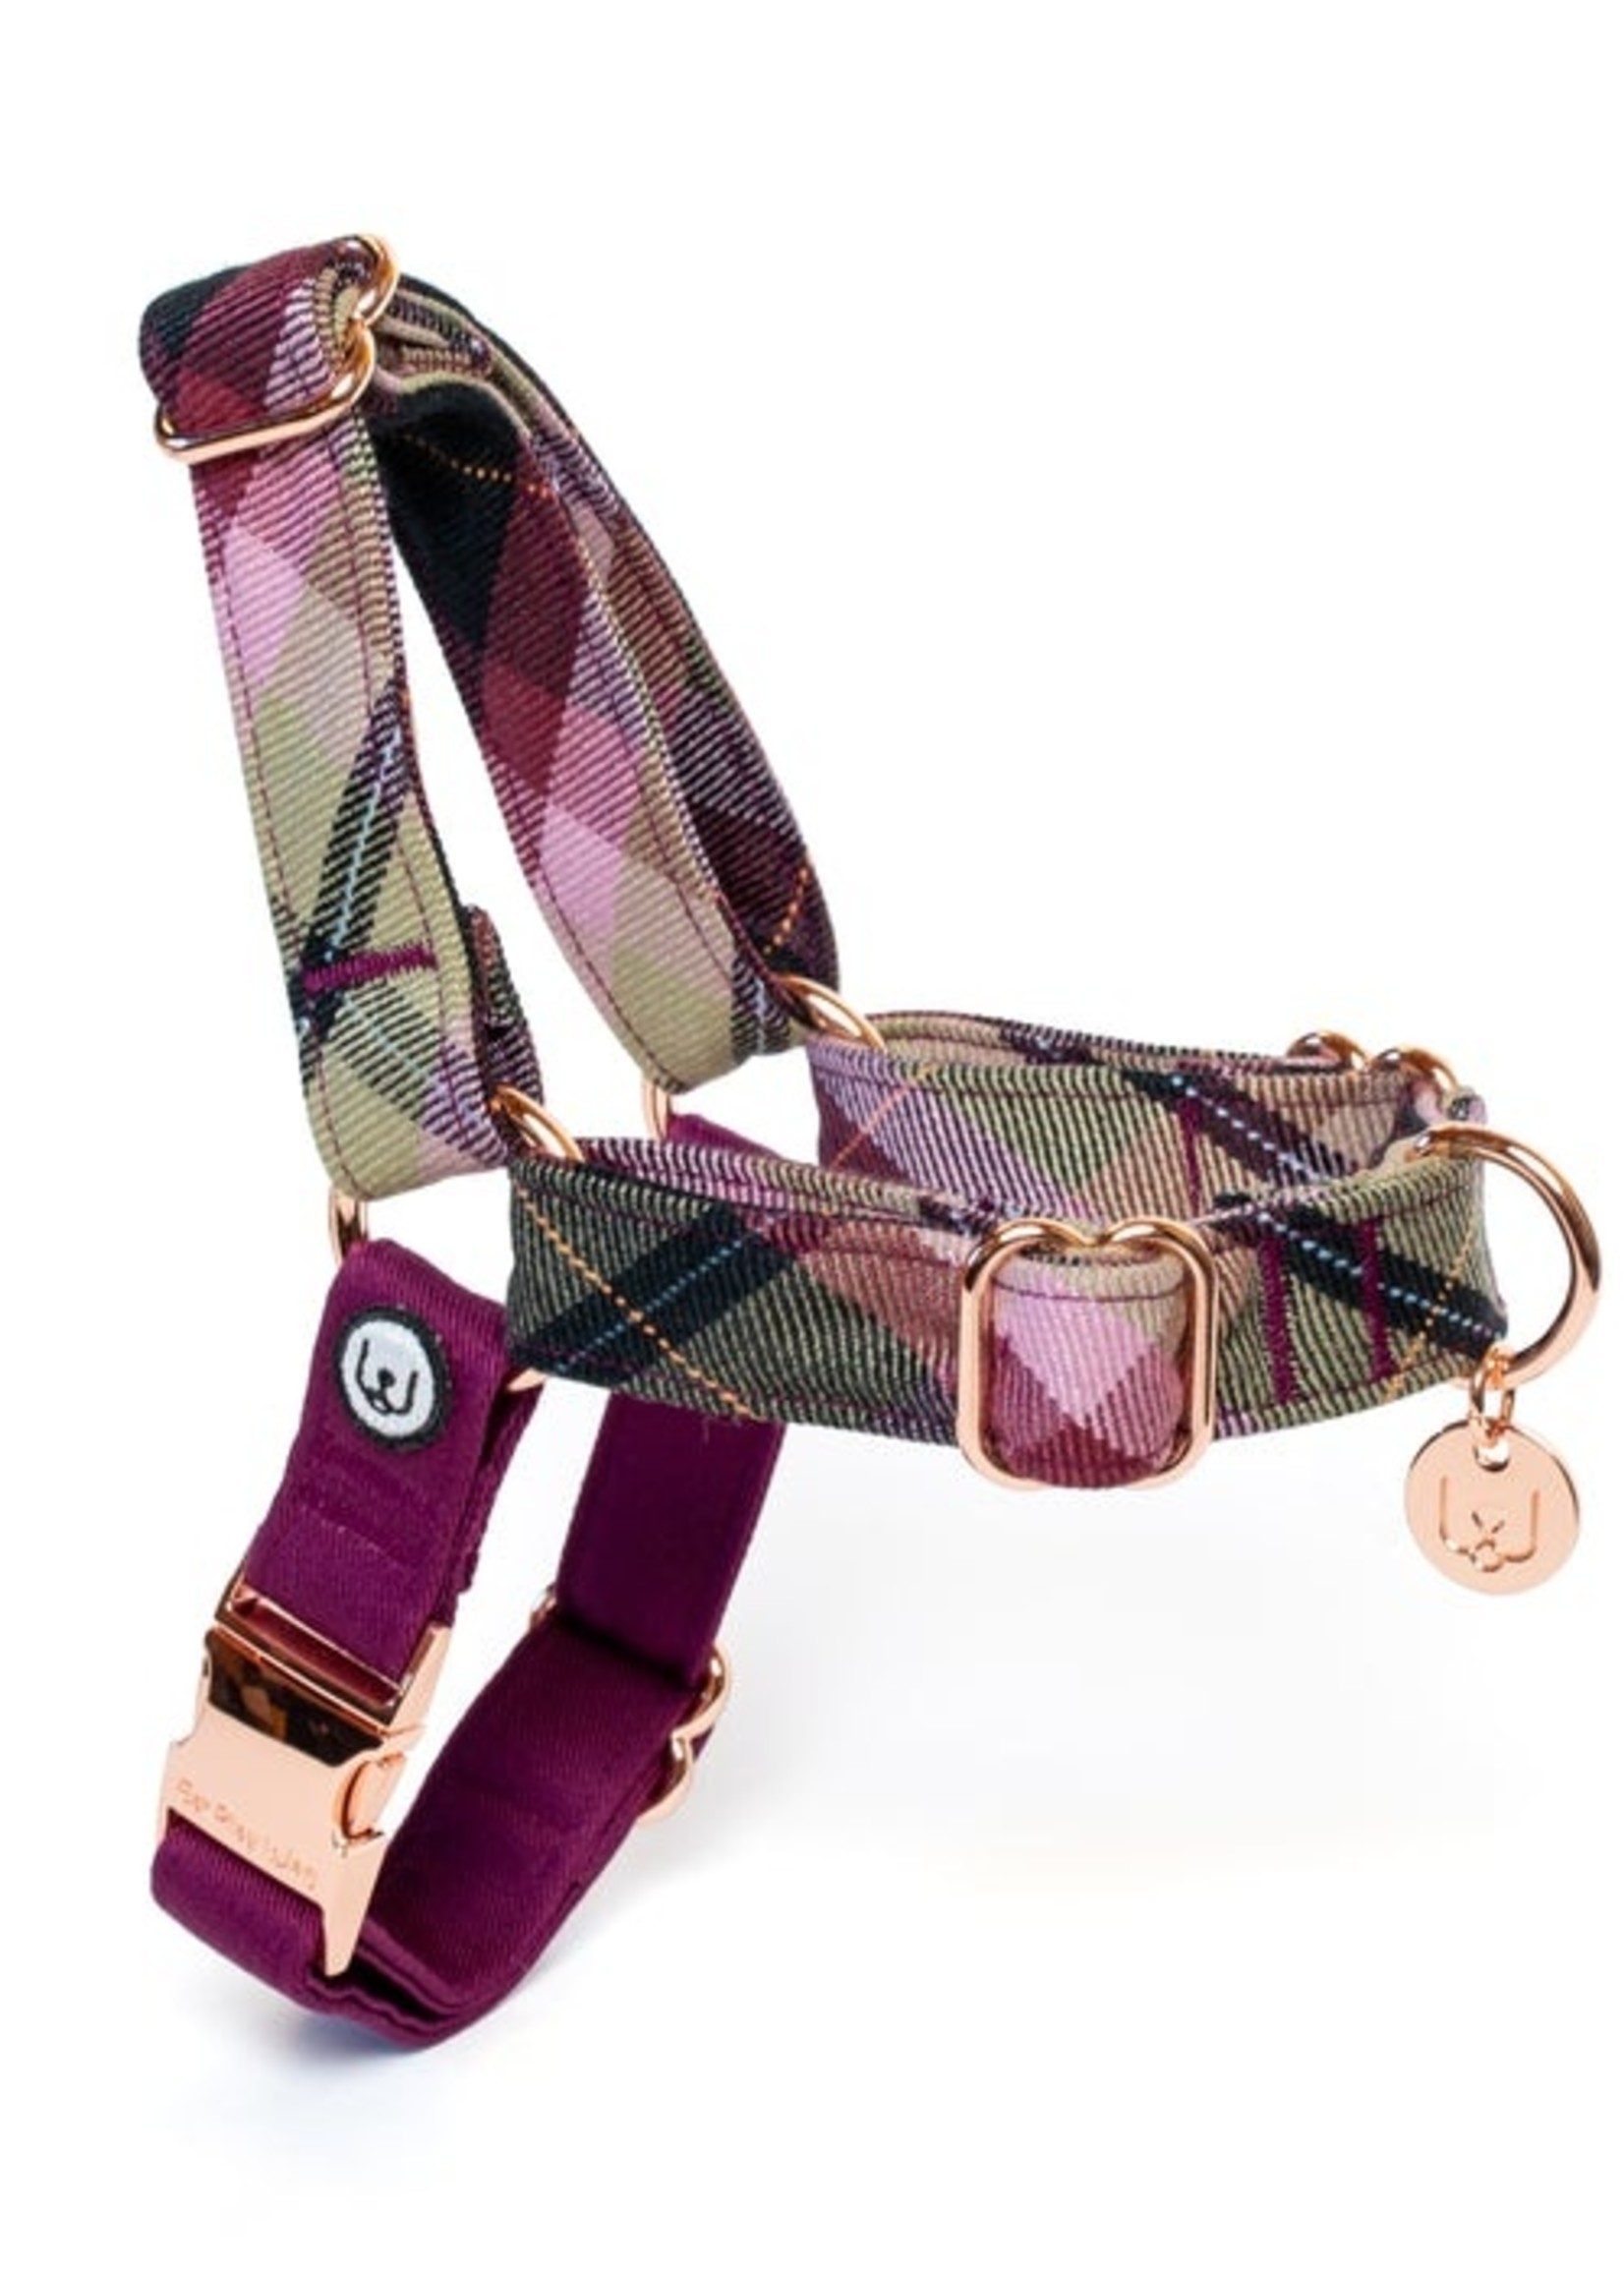 Eat Play Wag Eat Play Wag - Plum Plaid No-Pull Harness